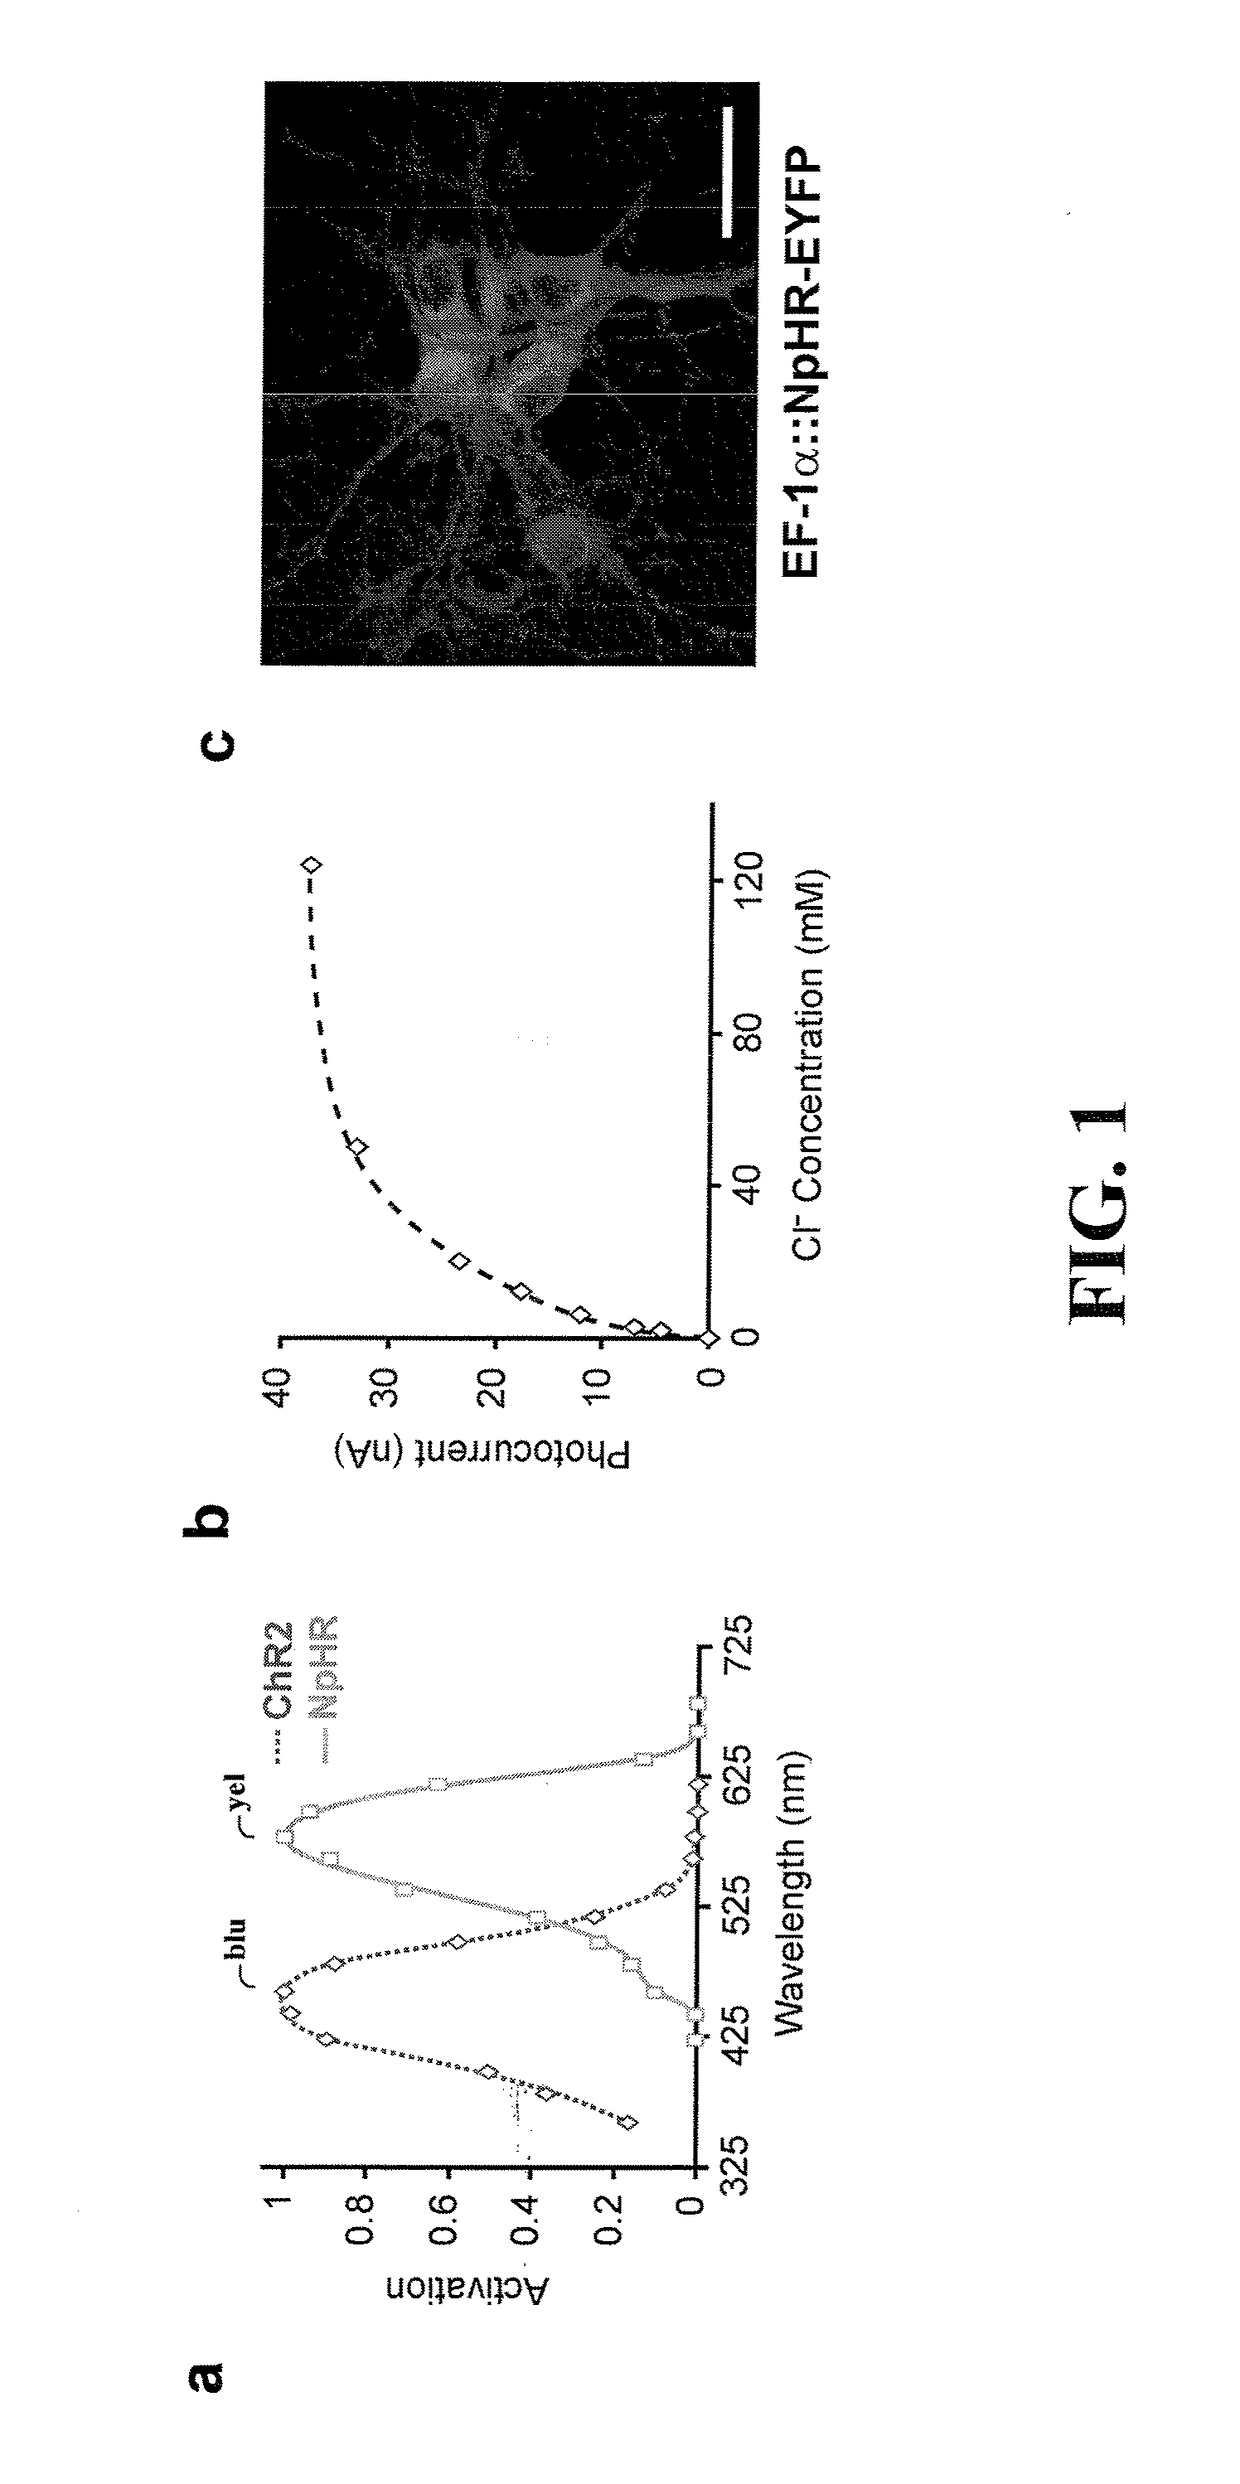 Optogenetic method for generating an inhibitory current in a mammalian neuron